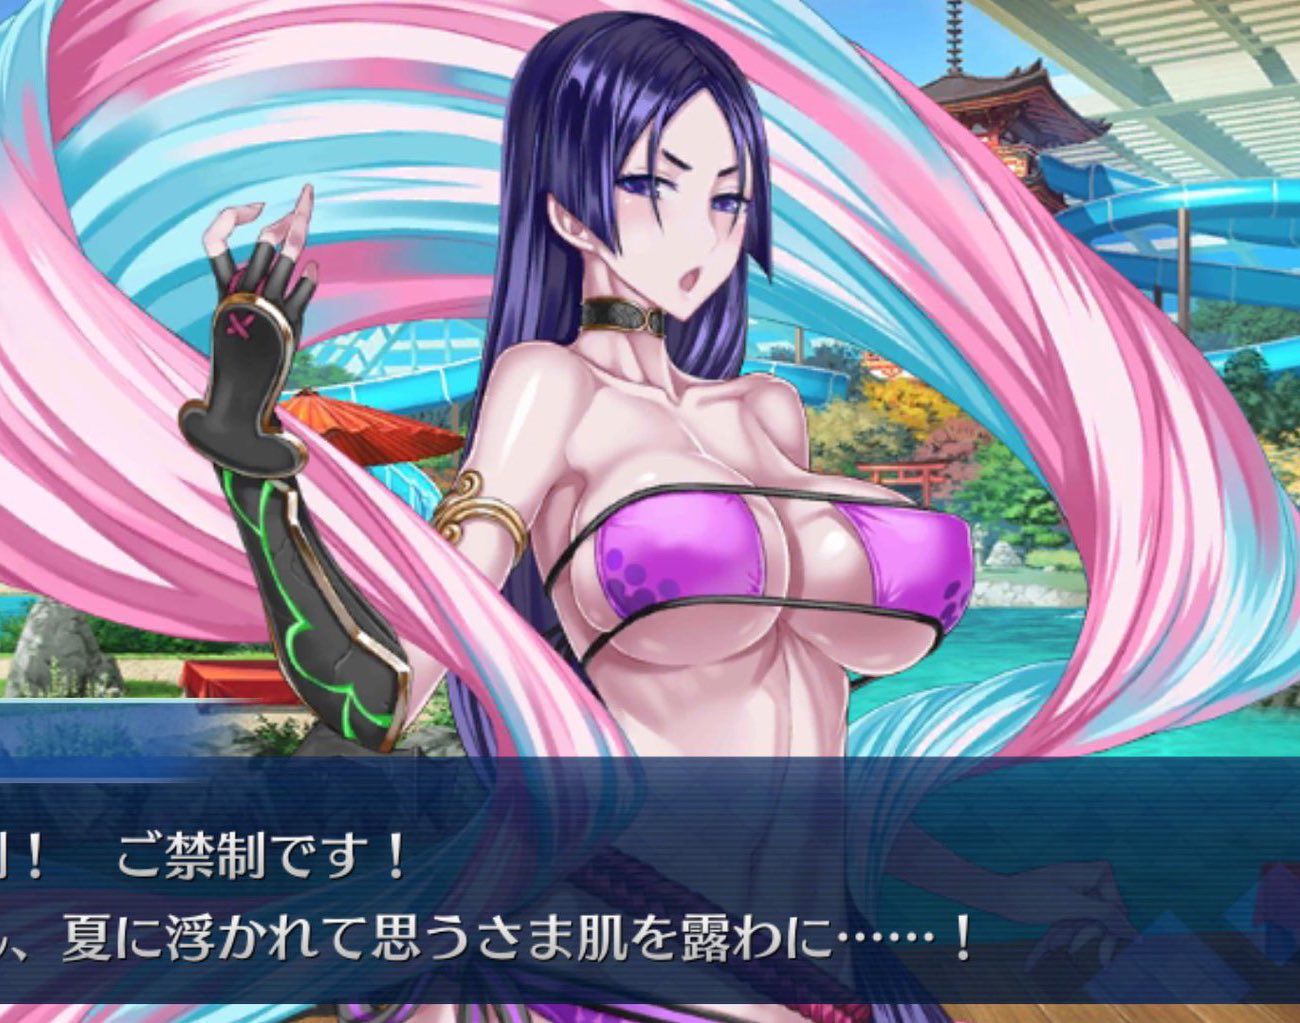 【Sad News】 FGO, the character of the swimsuit event is too sexual, and without age limit is slapped as abnormal 3